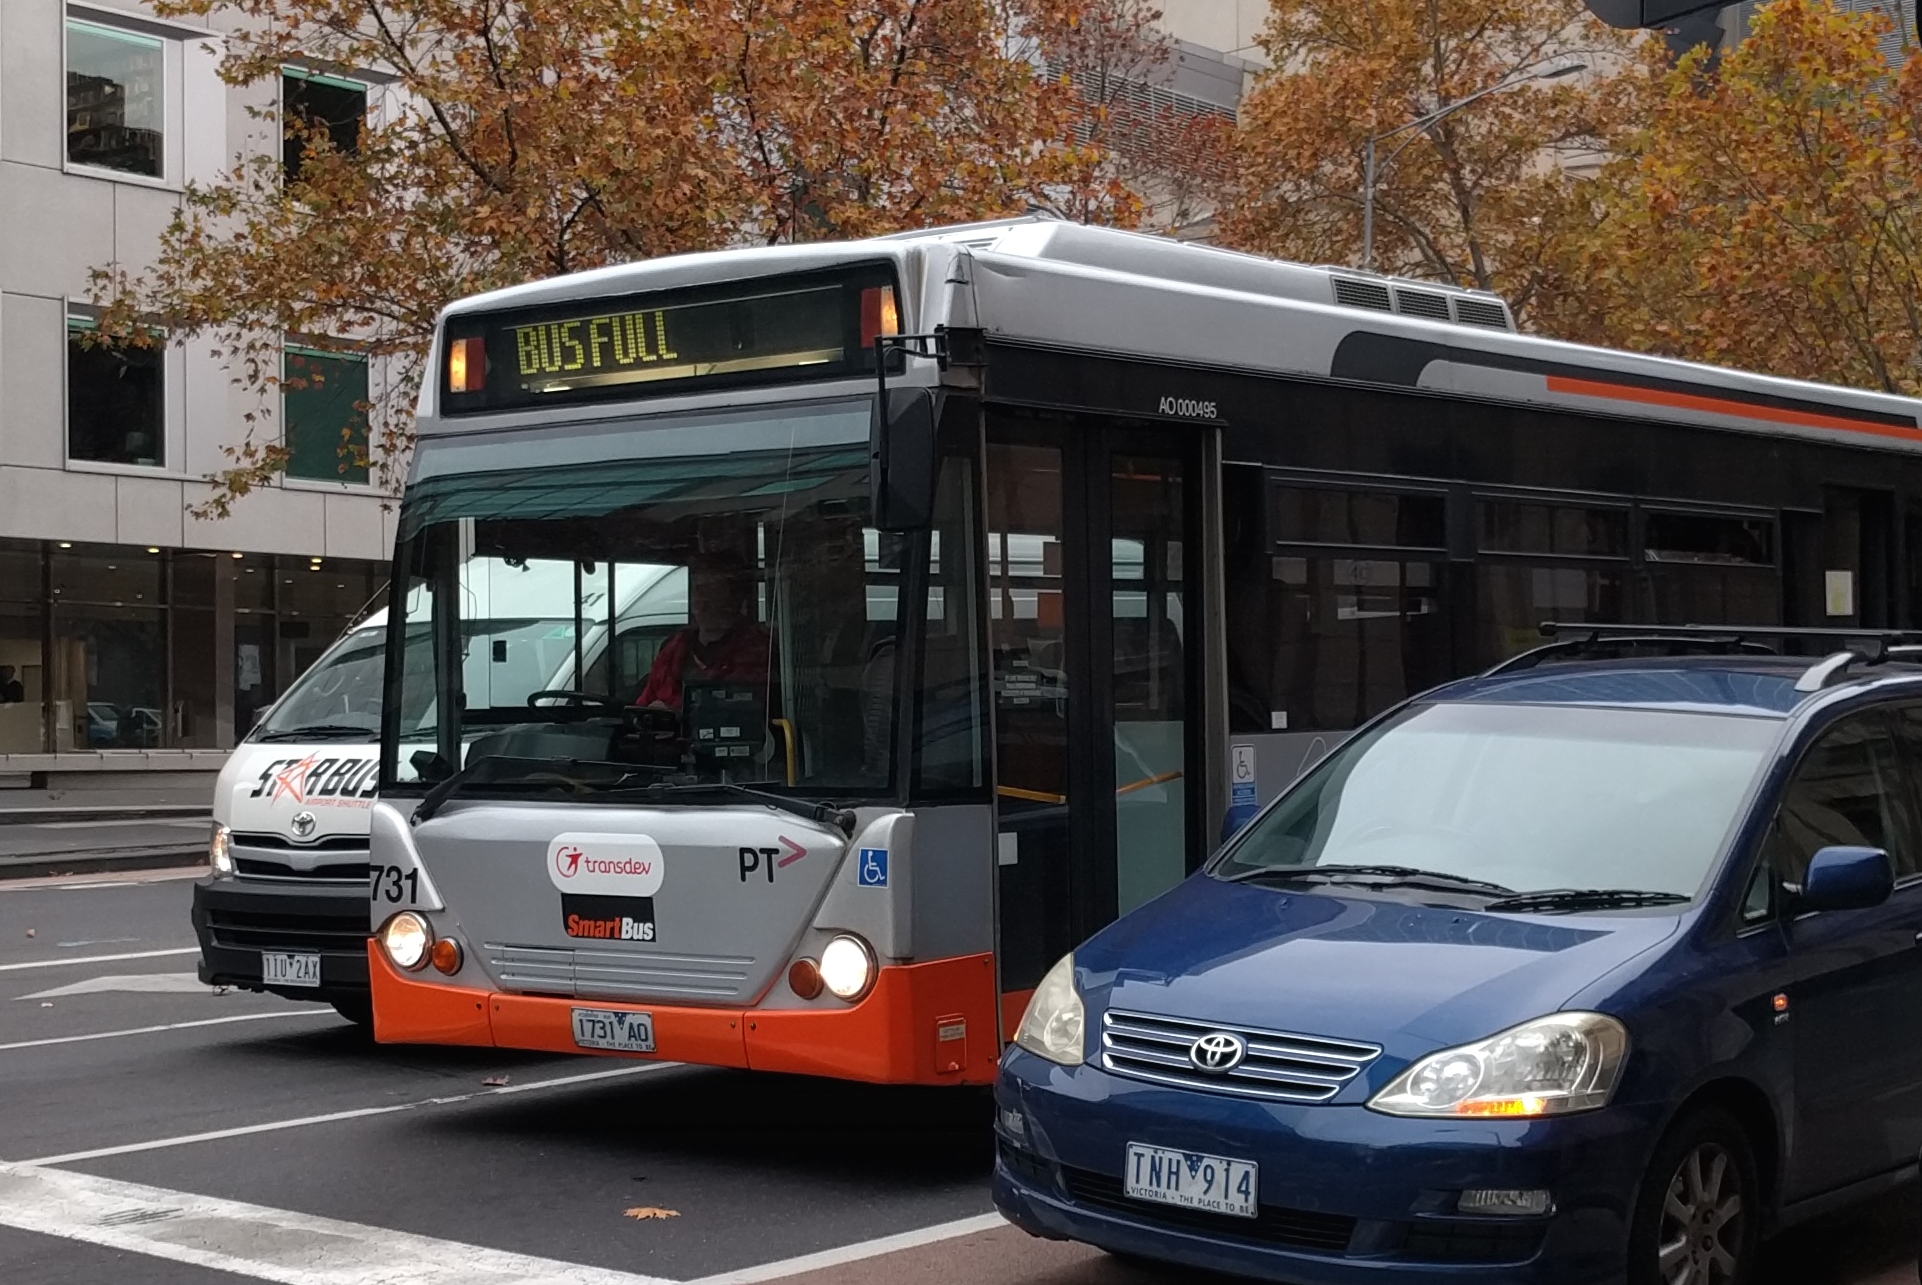 Transport for Everyone: Post COVID-19 Recovery – New vision for buses